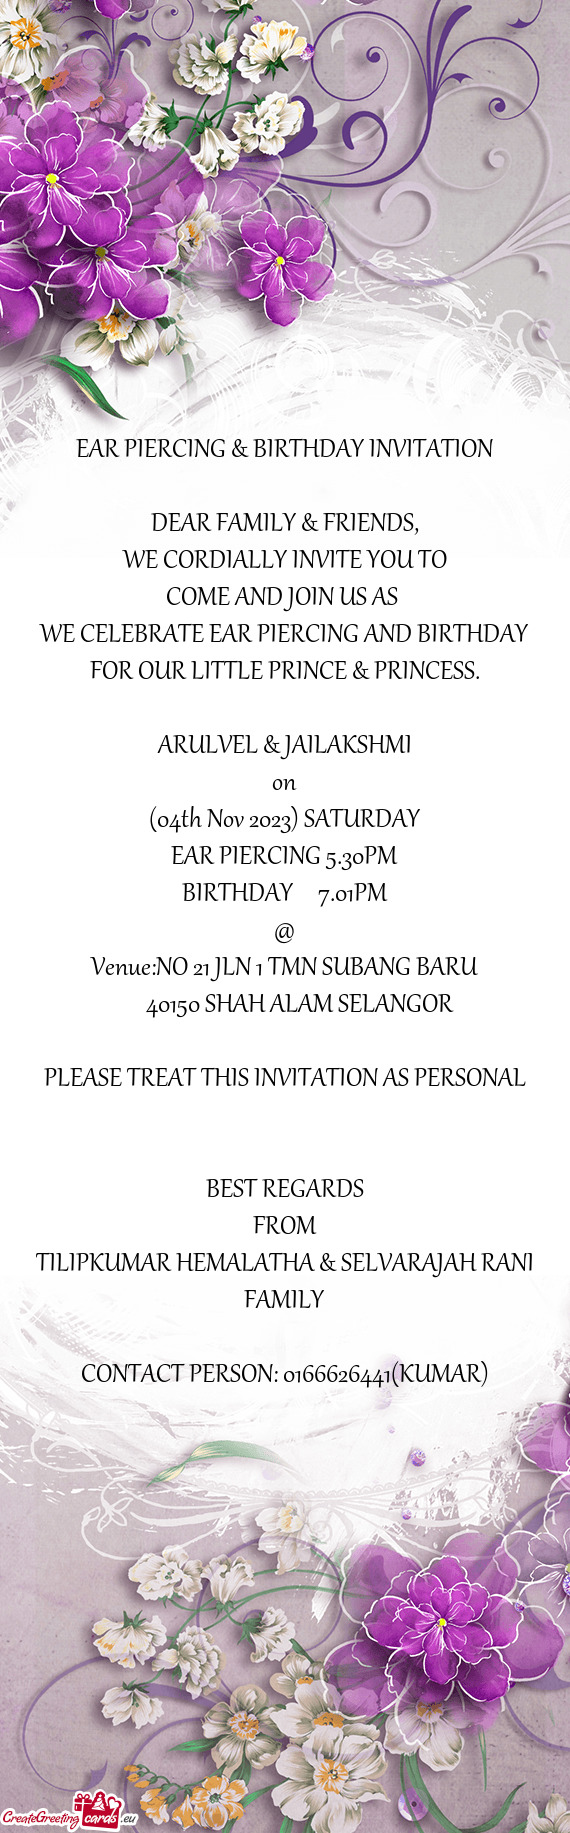 WE CELEBRATE EAR PIERCING AND BIRTHDAY FOR OUR LITTLE PRINCE & PRINCESS